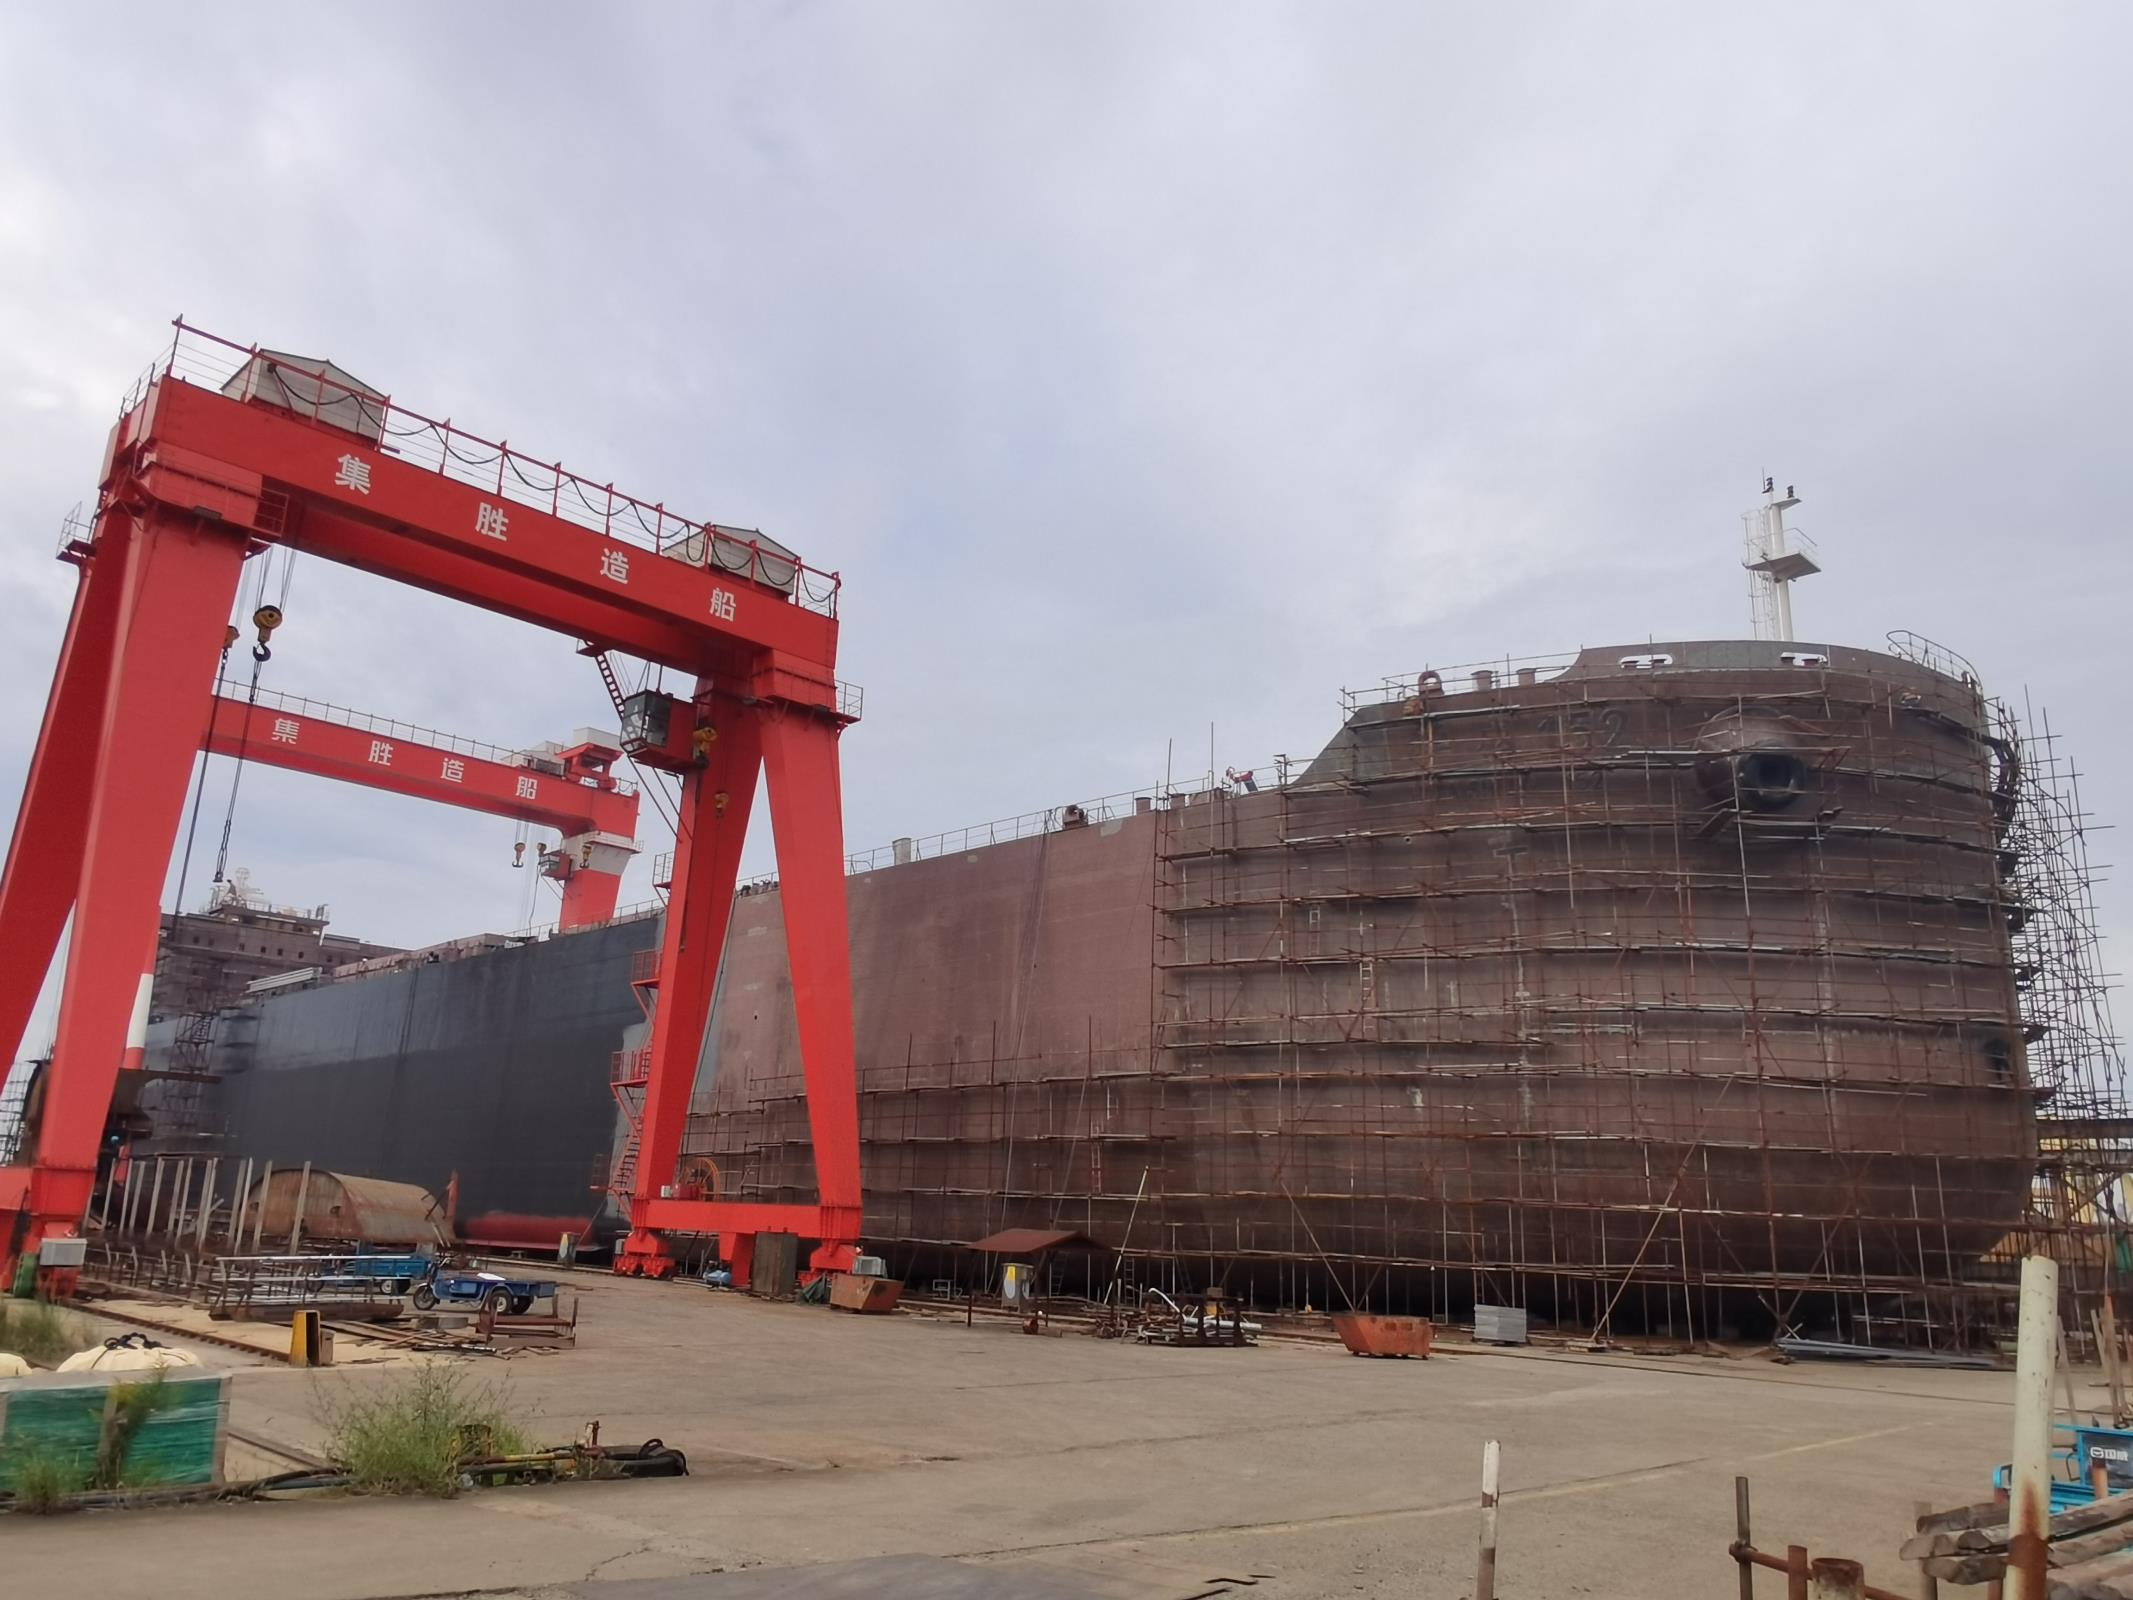 High standards and strict requirements for 52,500 tons of new ships are under orderly construction